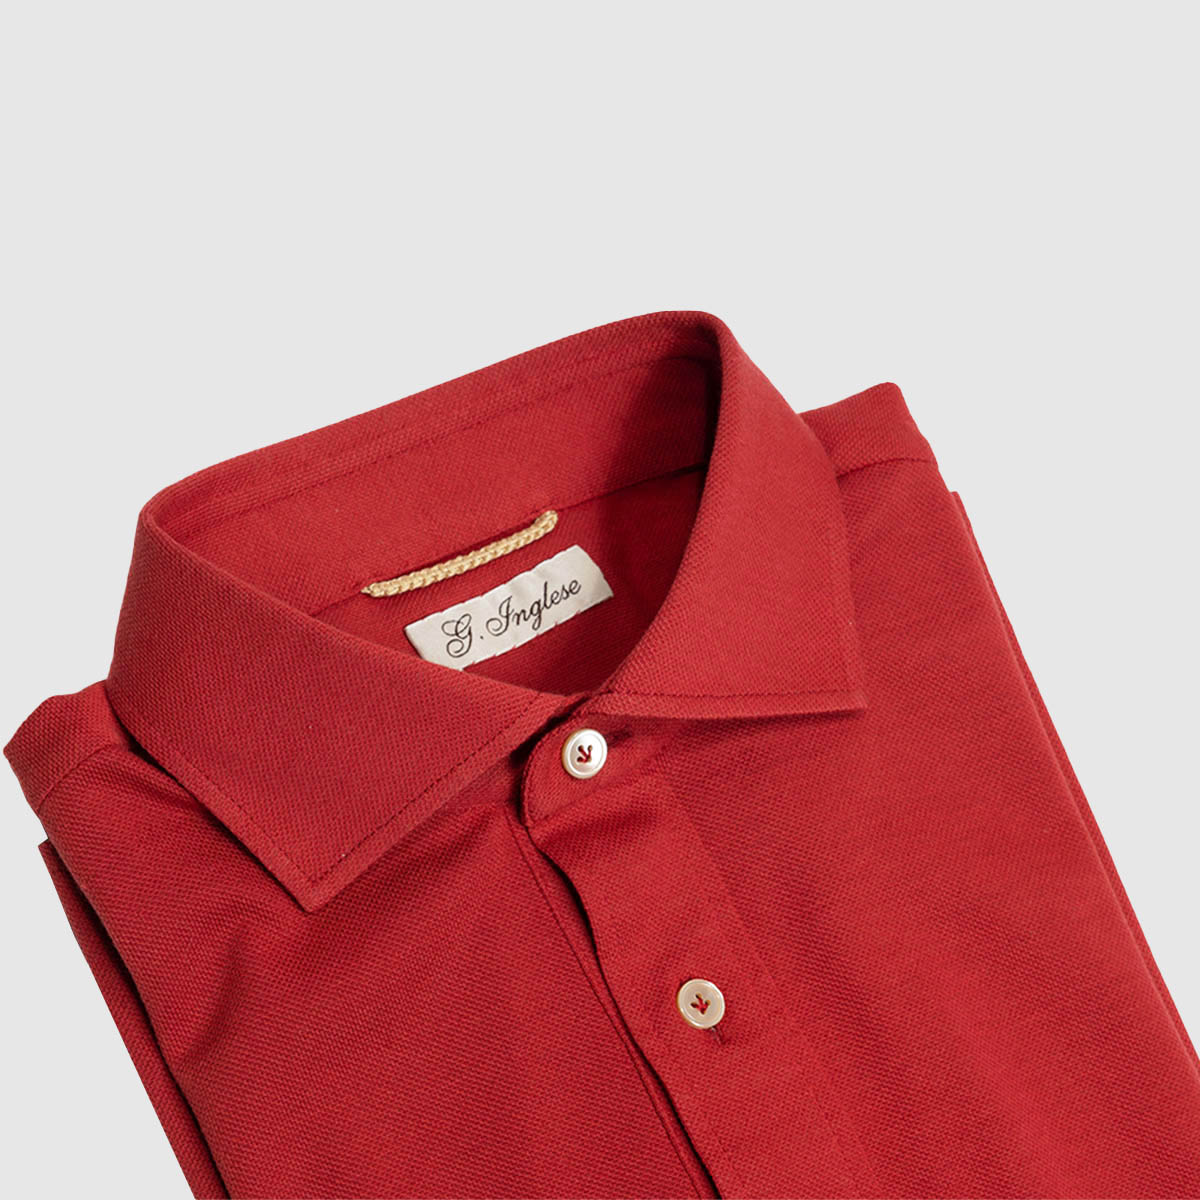 Piquet Cotton Polo Shirt in Red G. Inglese on sale 2022 2